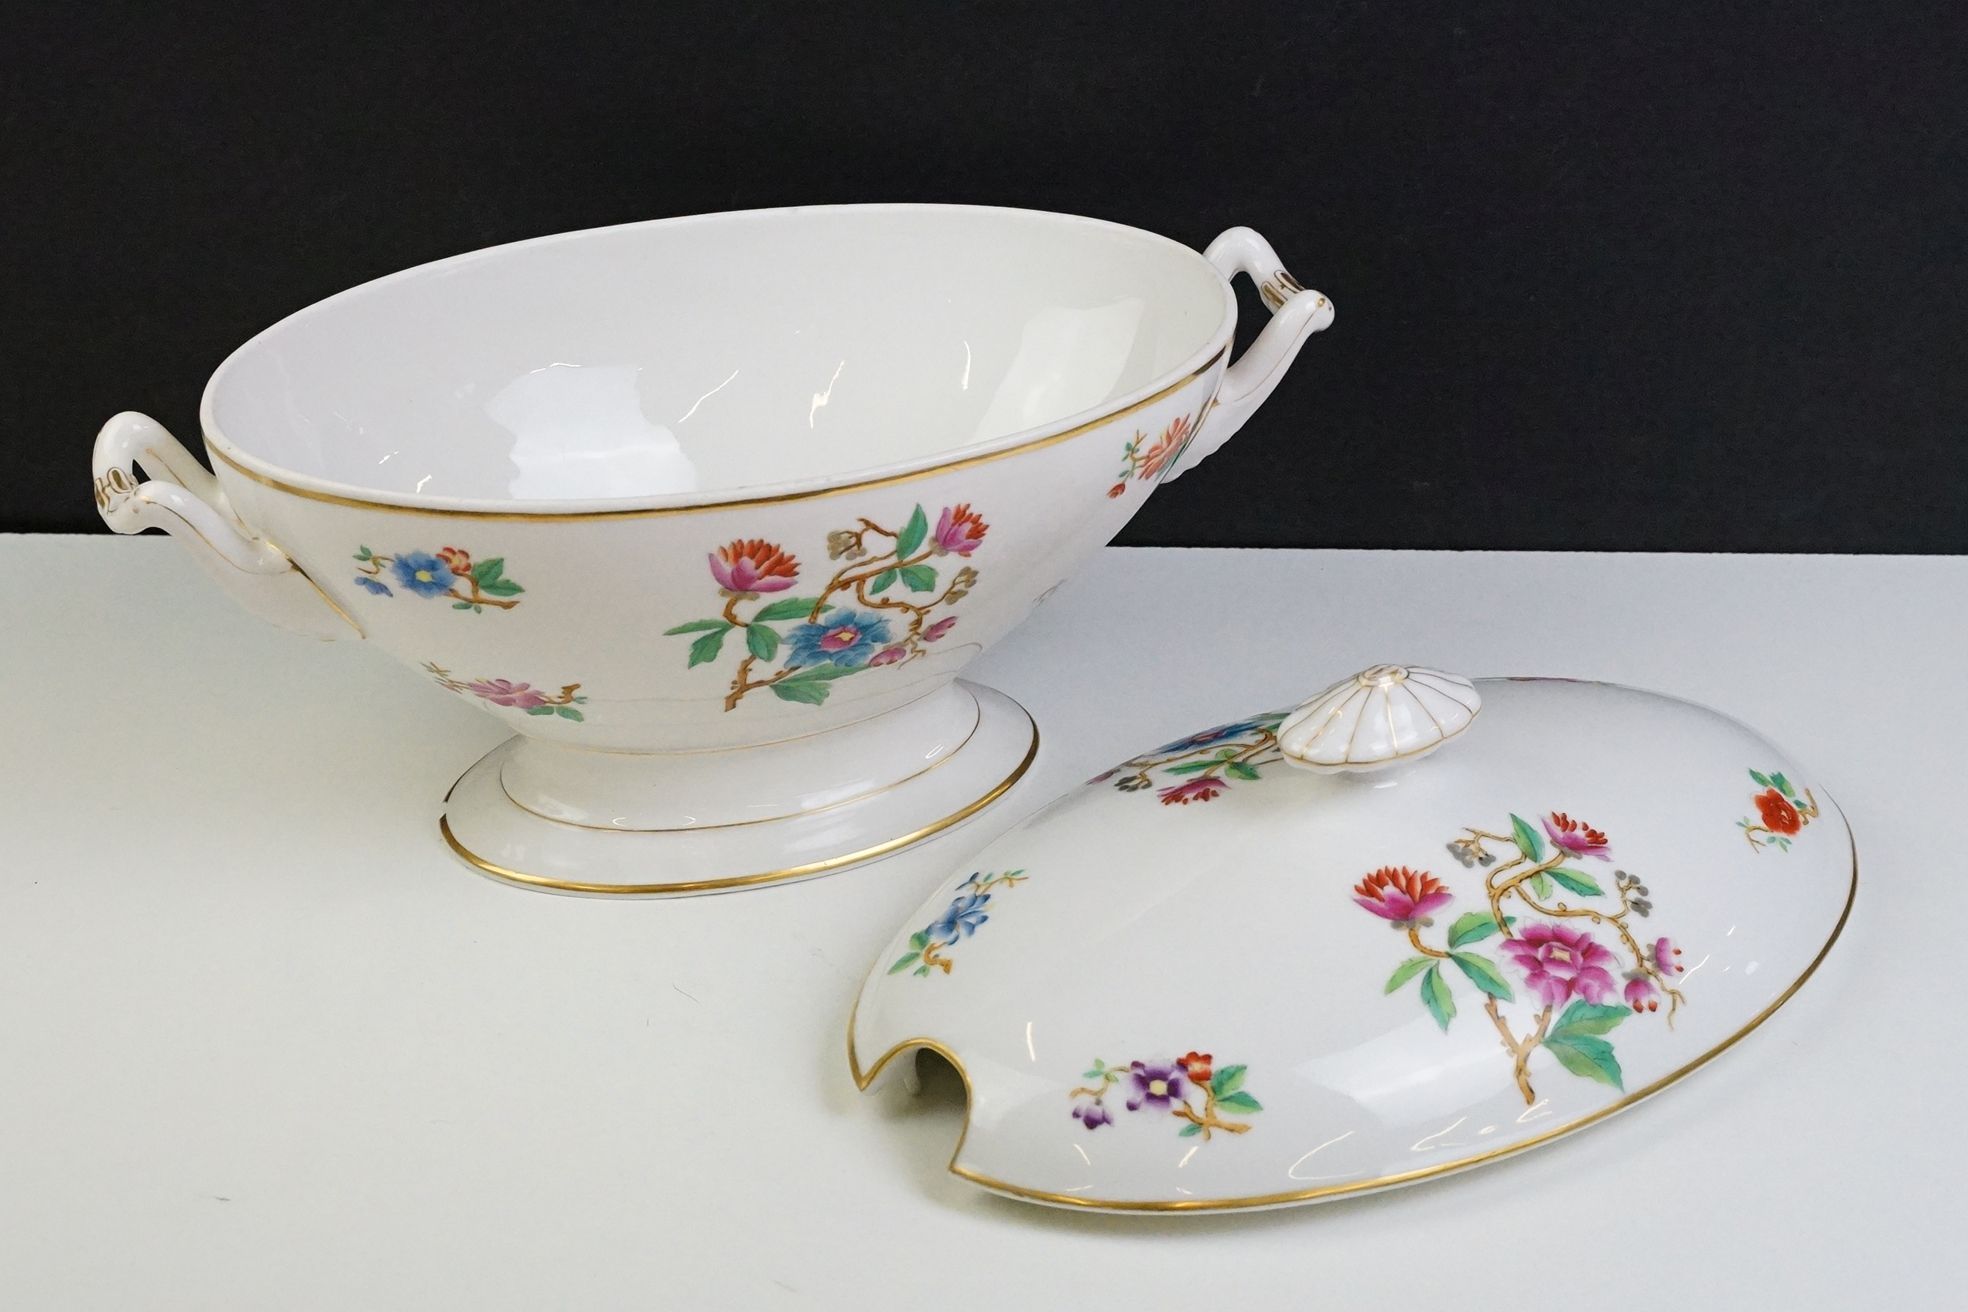 19th Century white ceramic large footed serving tureen with hand coloured floral decoration - Image 5 of 9